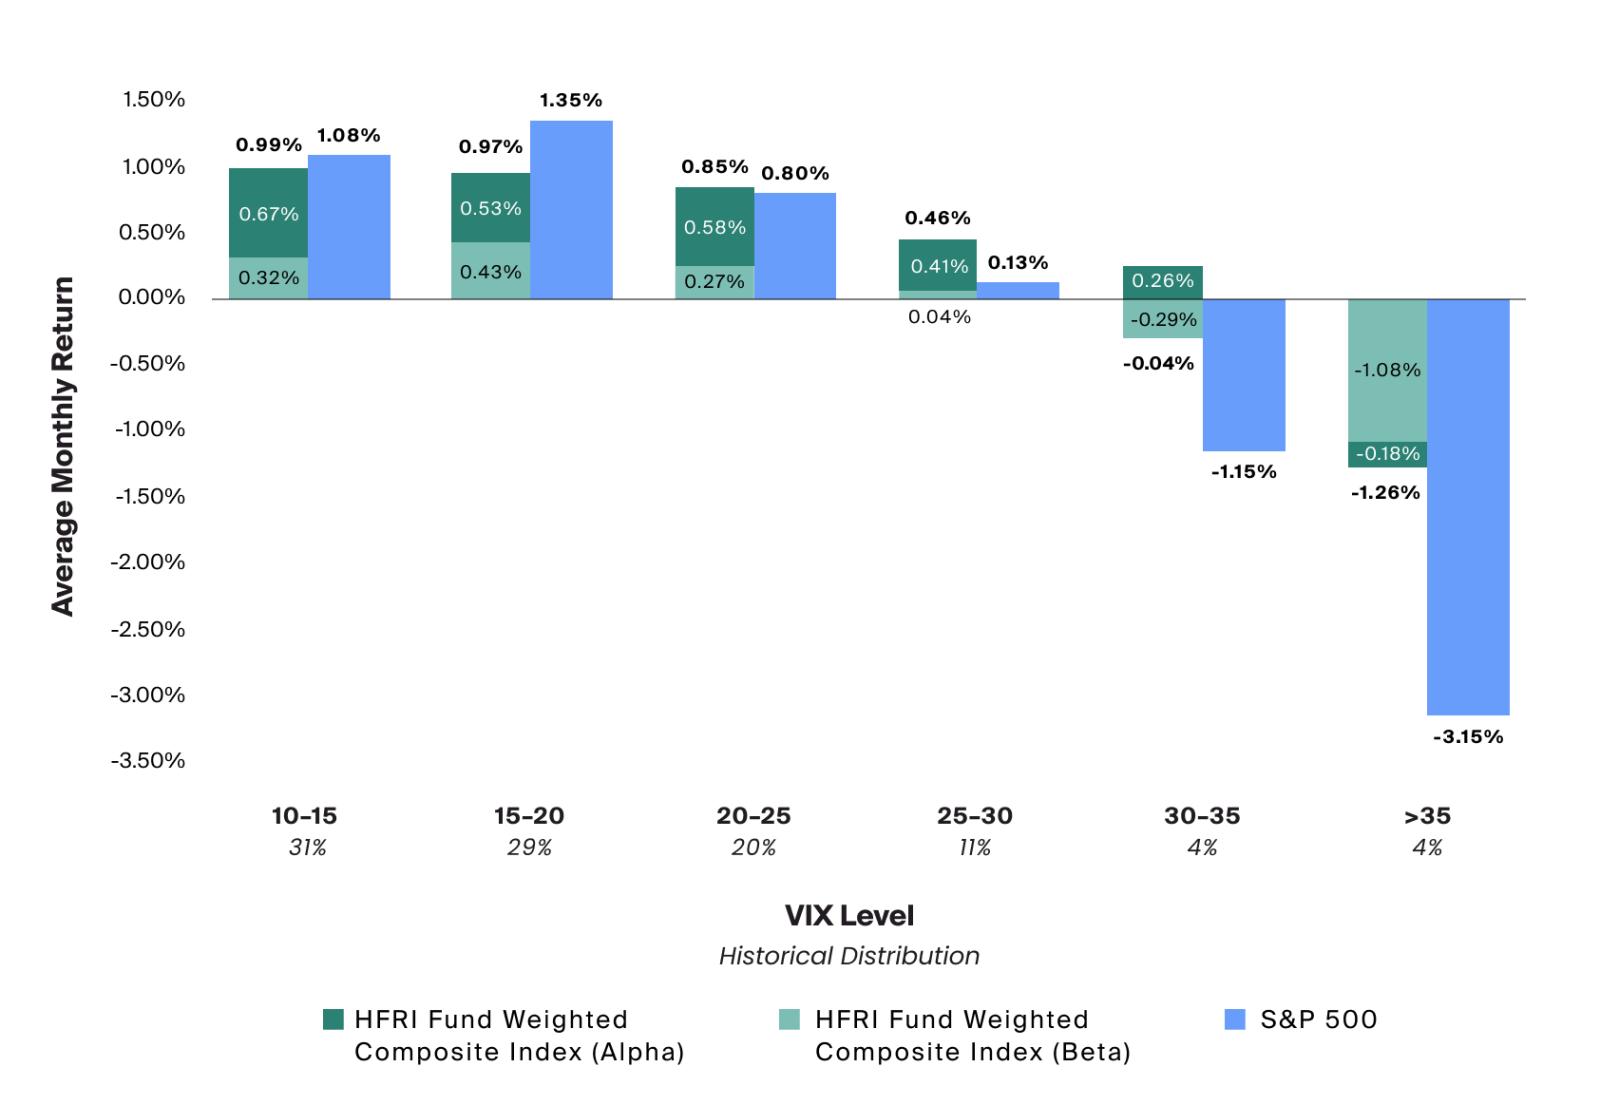 Hedge funds have historically outperformed in higher volatility environments, while underperforming during periods of lower volatility (Exhibit 1)